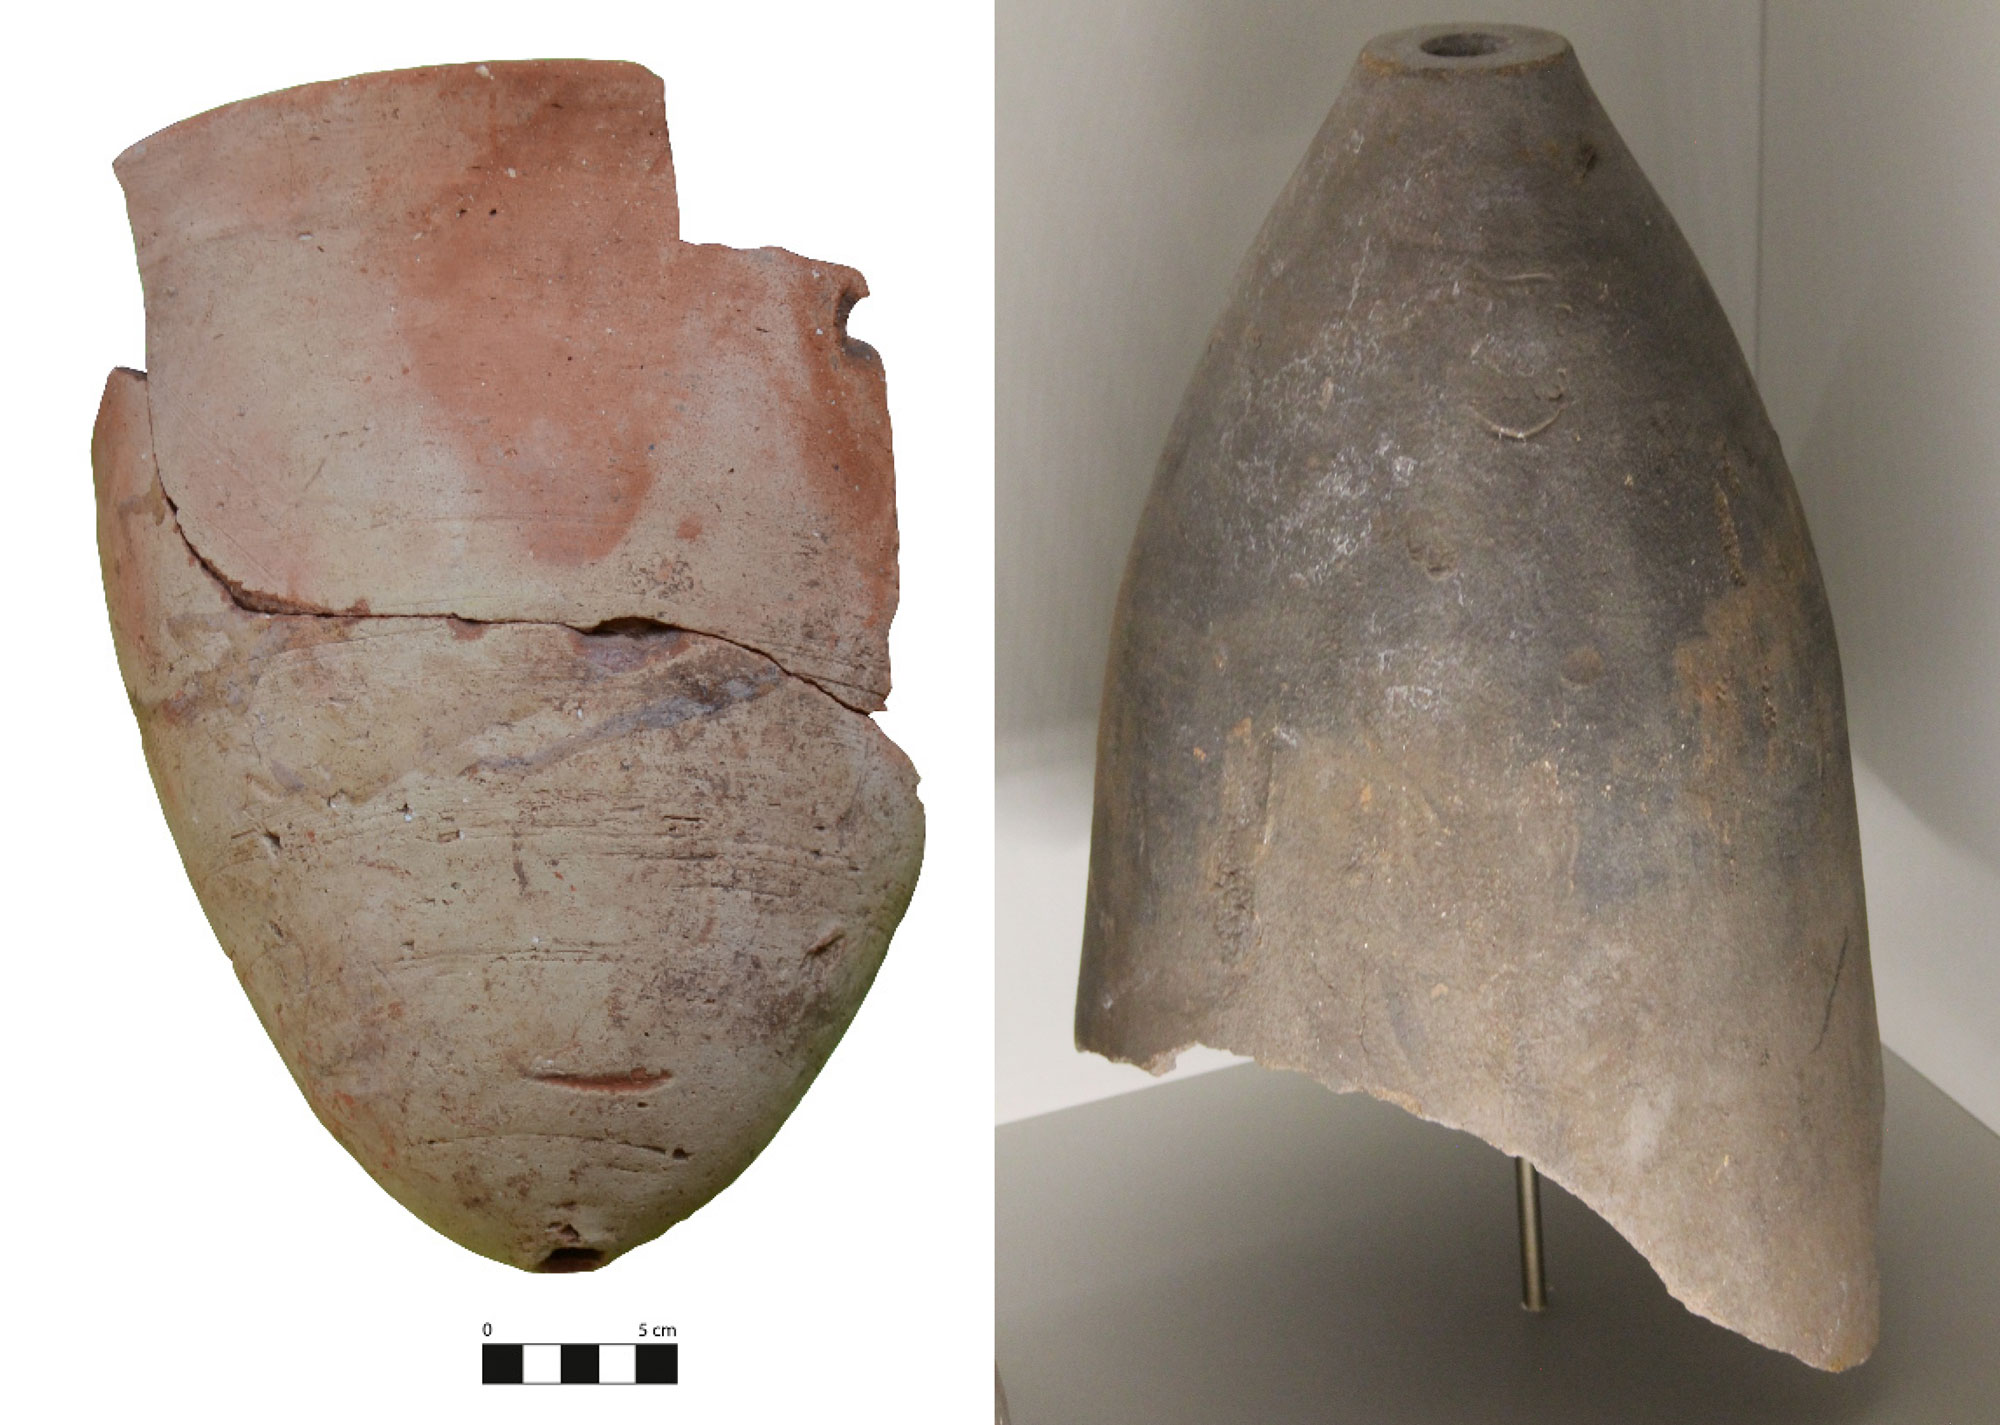 2-panel image showing photos of sugar cones used for making sugar loaves. Panel 1: A ceramic cone dating to the late 1200s or earlier from Sicily. The cone has hole at the bottom. Panel 2: A similar cone from the 1800s of France. In this case, the cone is oriented with the hole pointing upward.